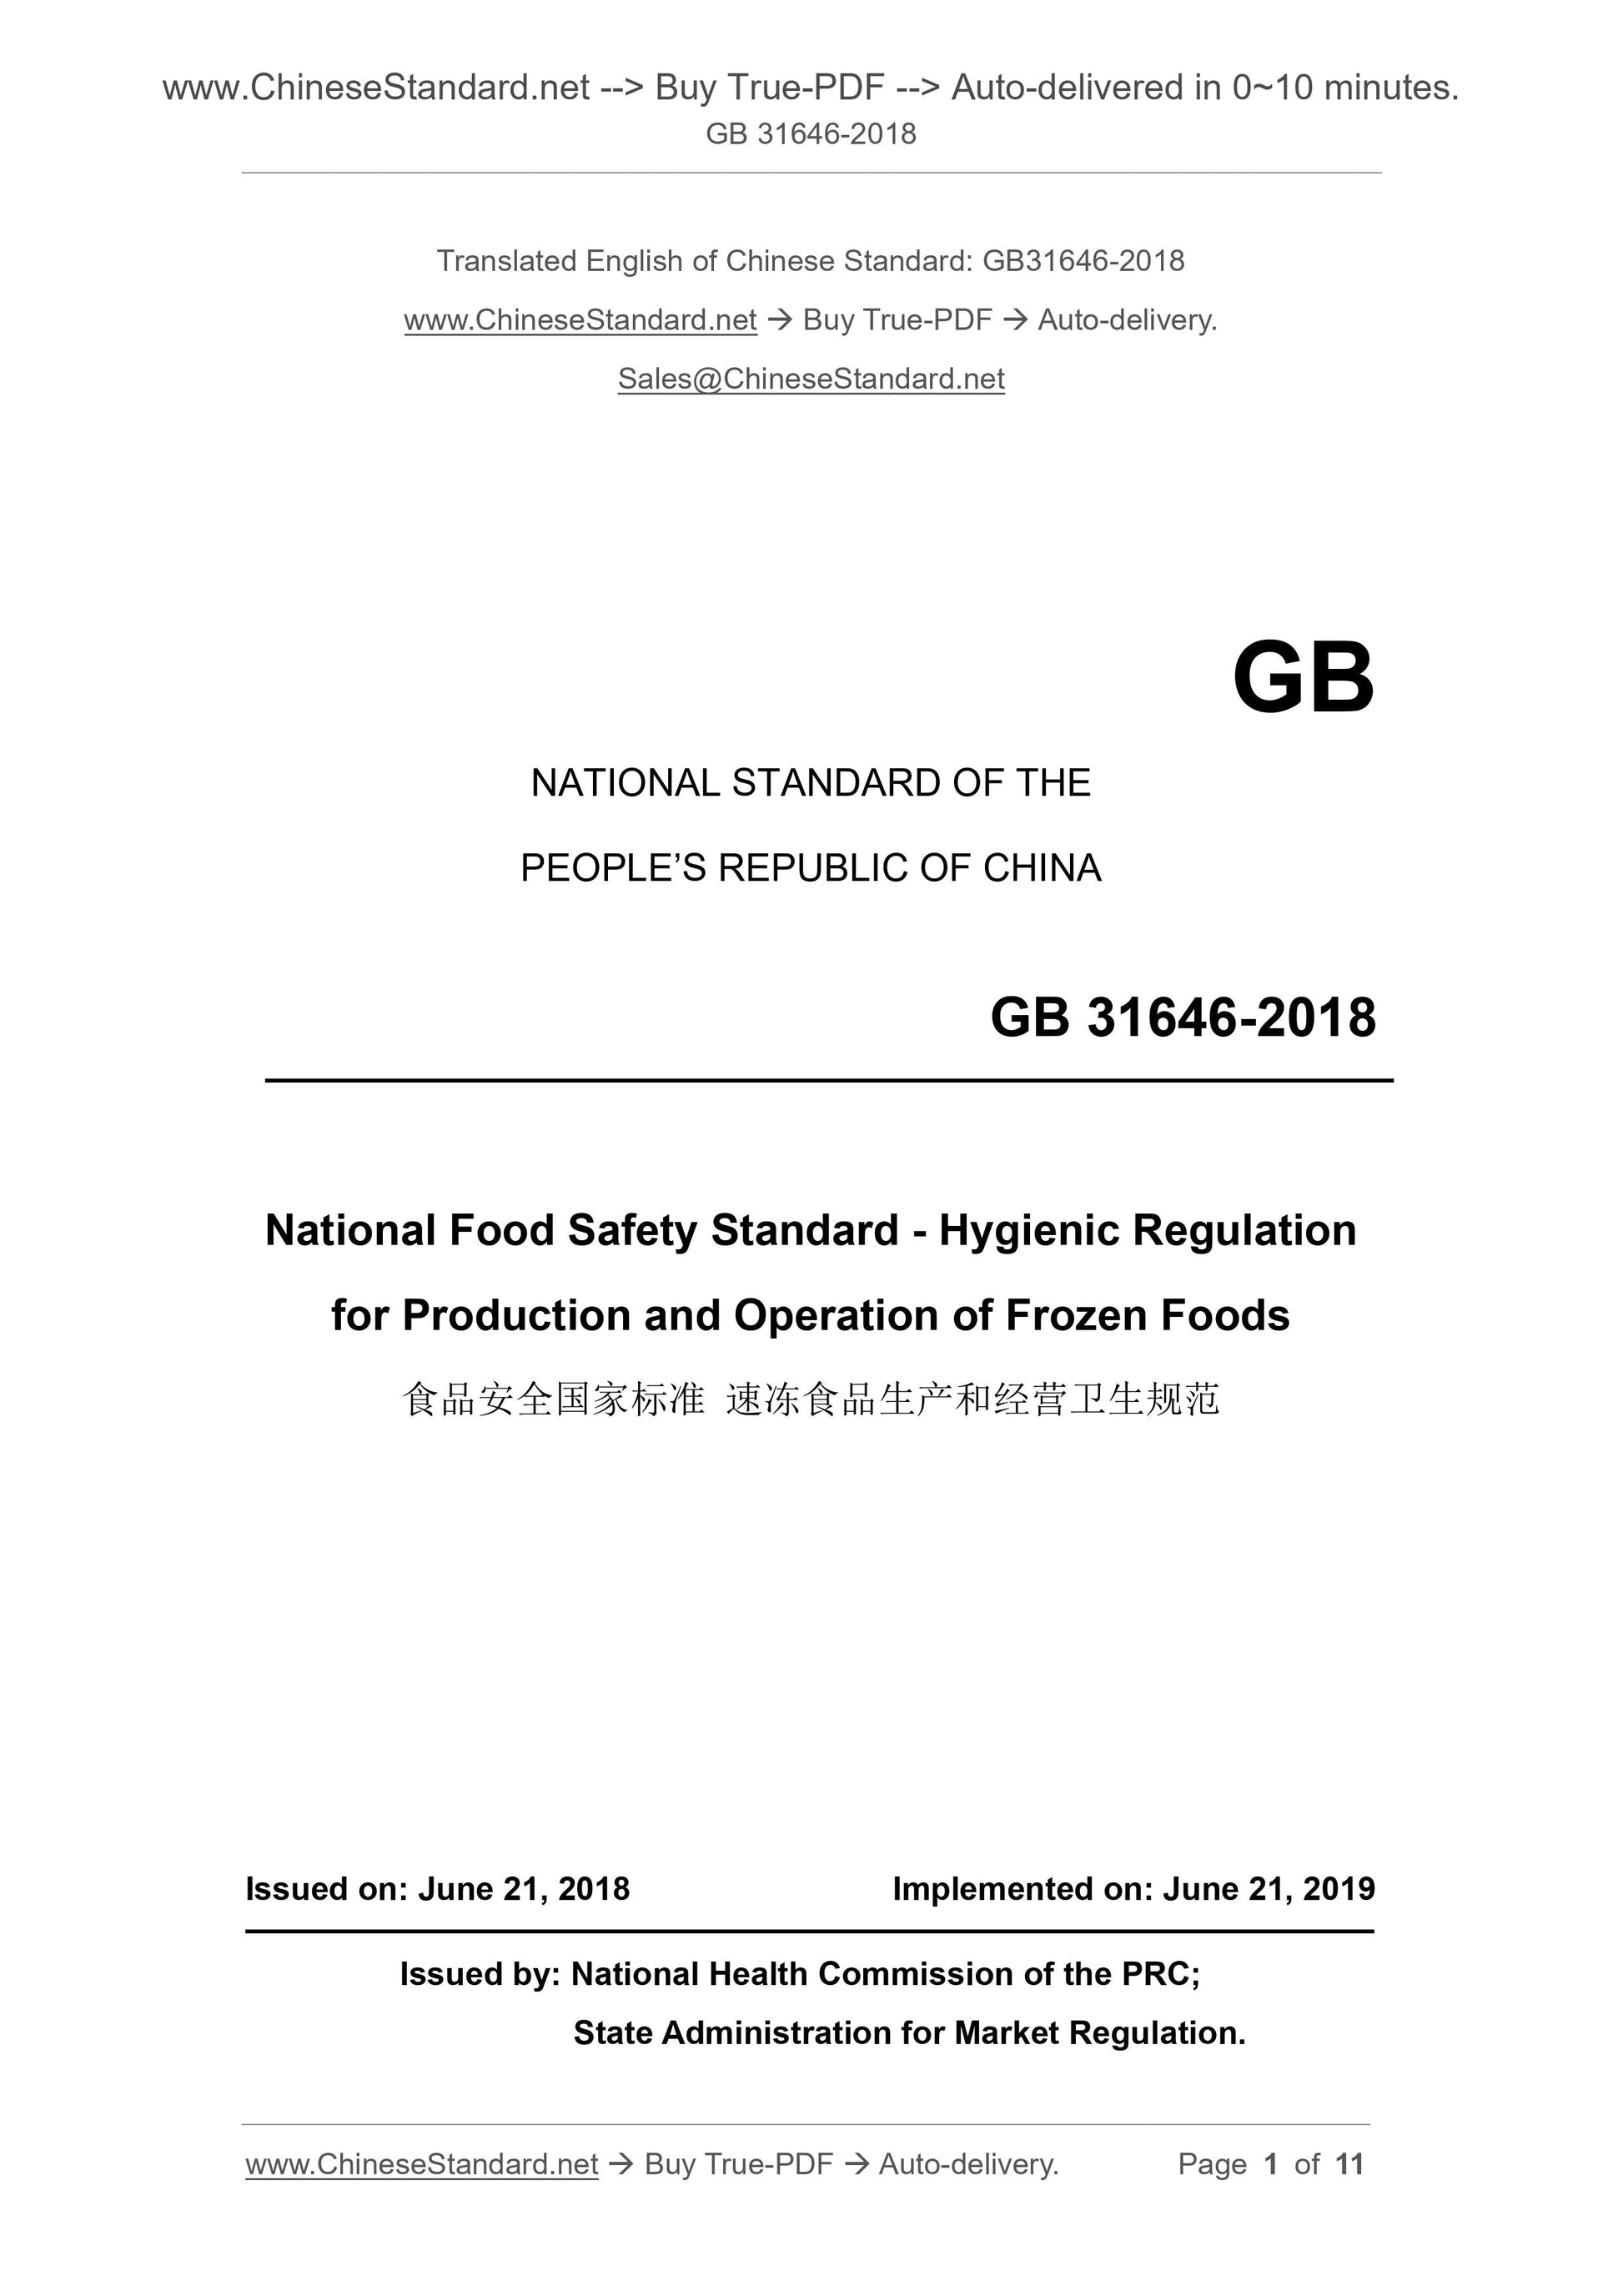 GB 31646-2018 Page 1